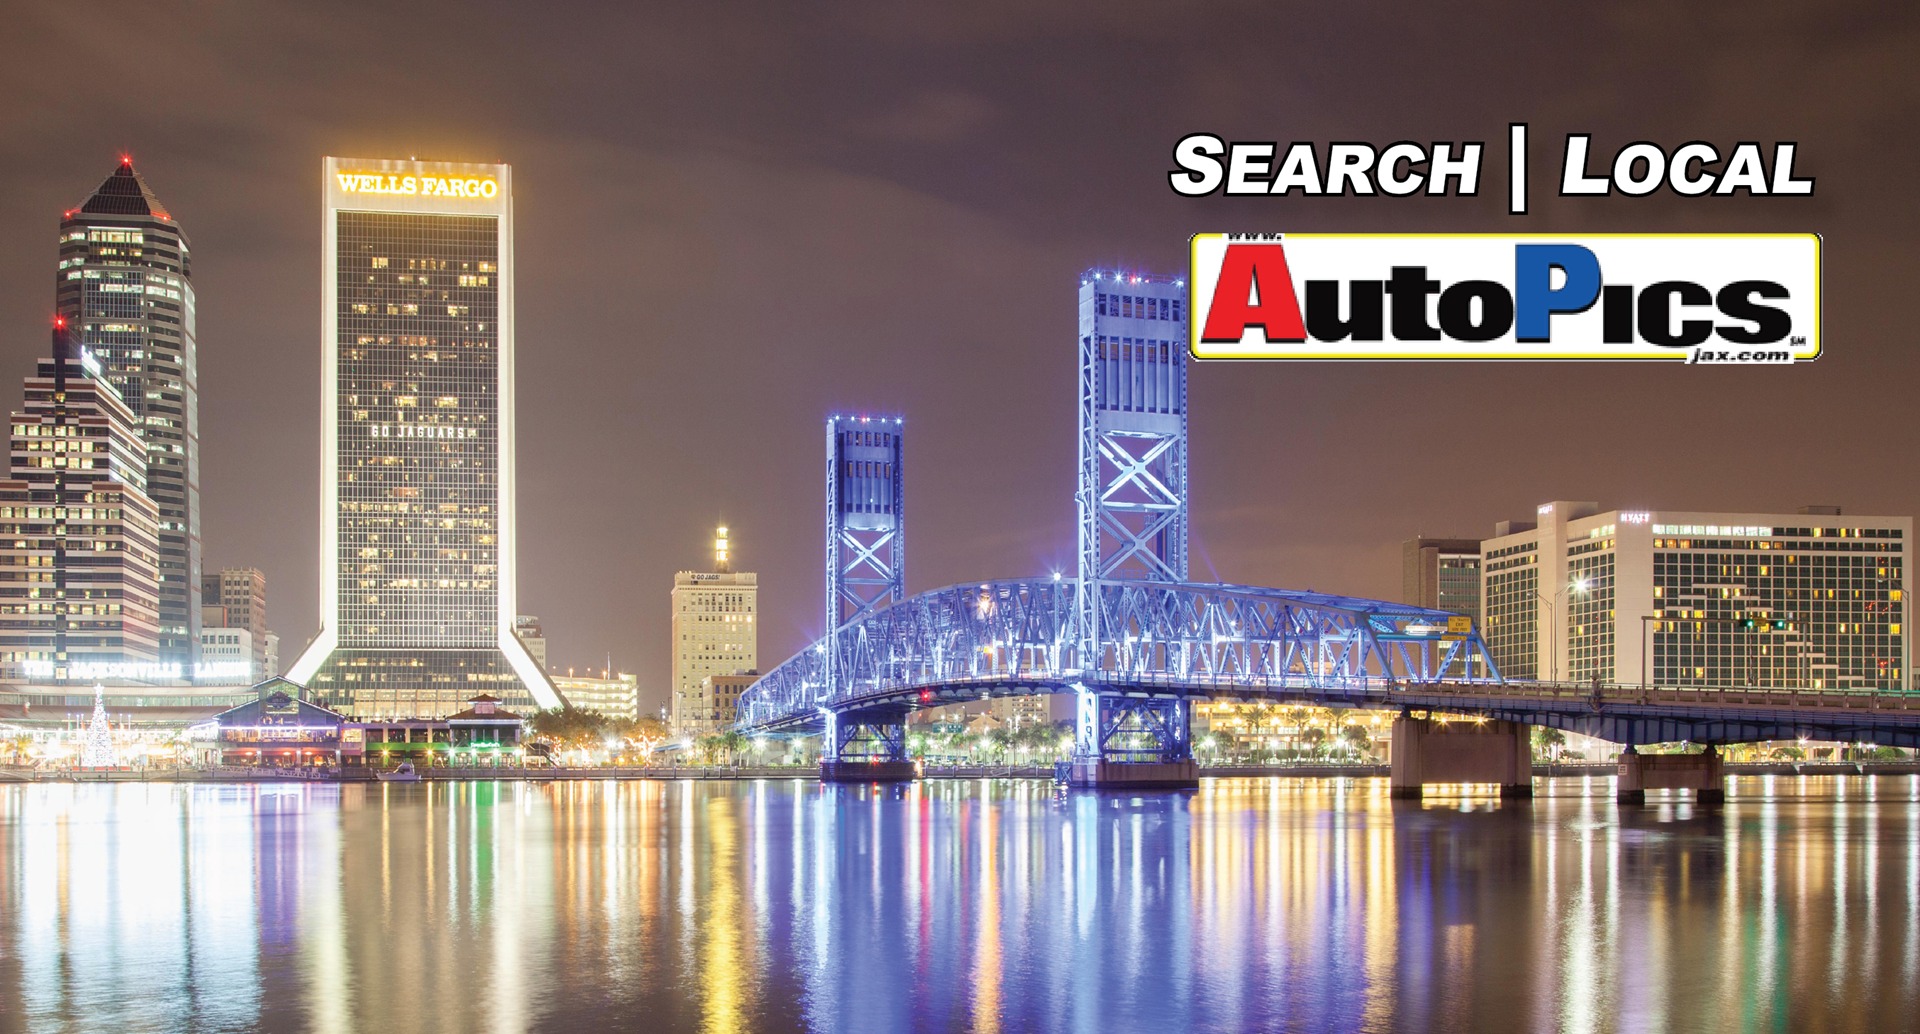 AutoPics Jacksonville - NEW and USED CARS for sale in Jacksonville ...